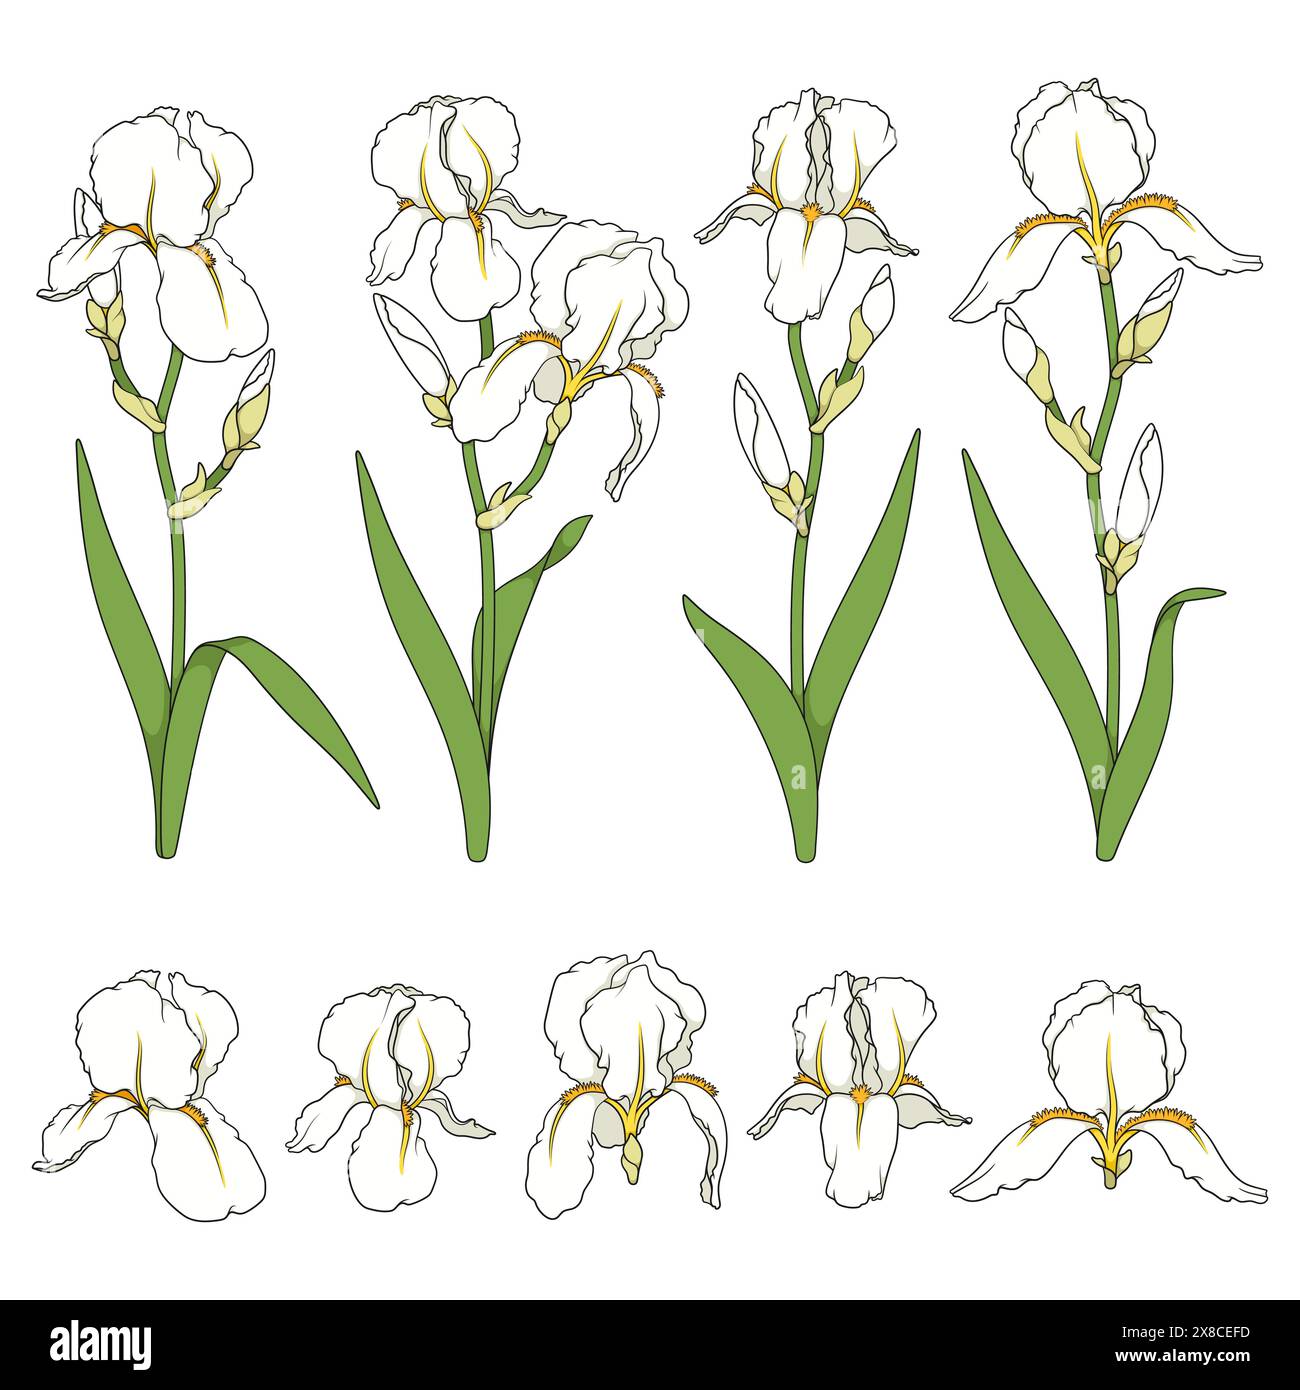 Set of color illustrations with white iris flowers. Isolated vector objects on white background. Stock Vector